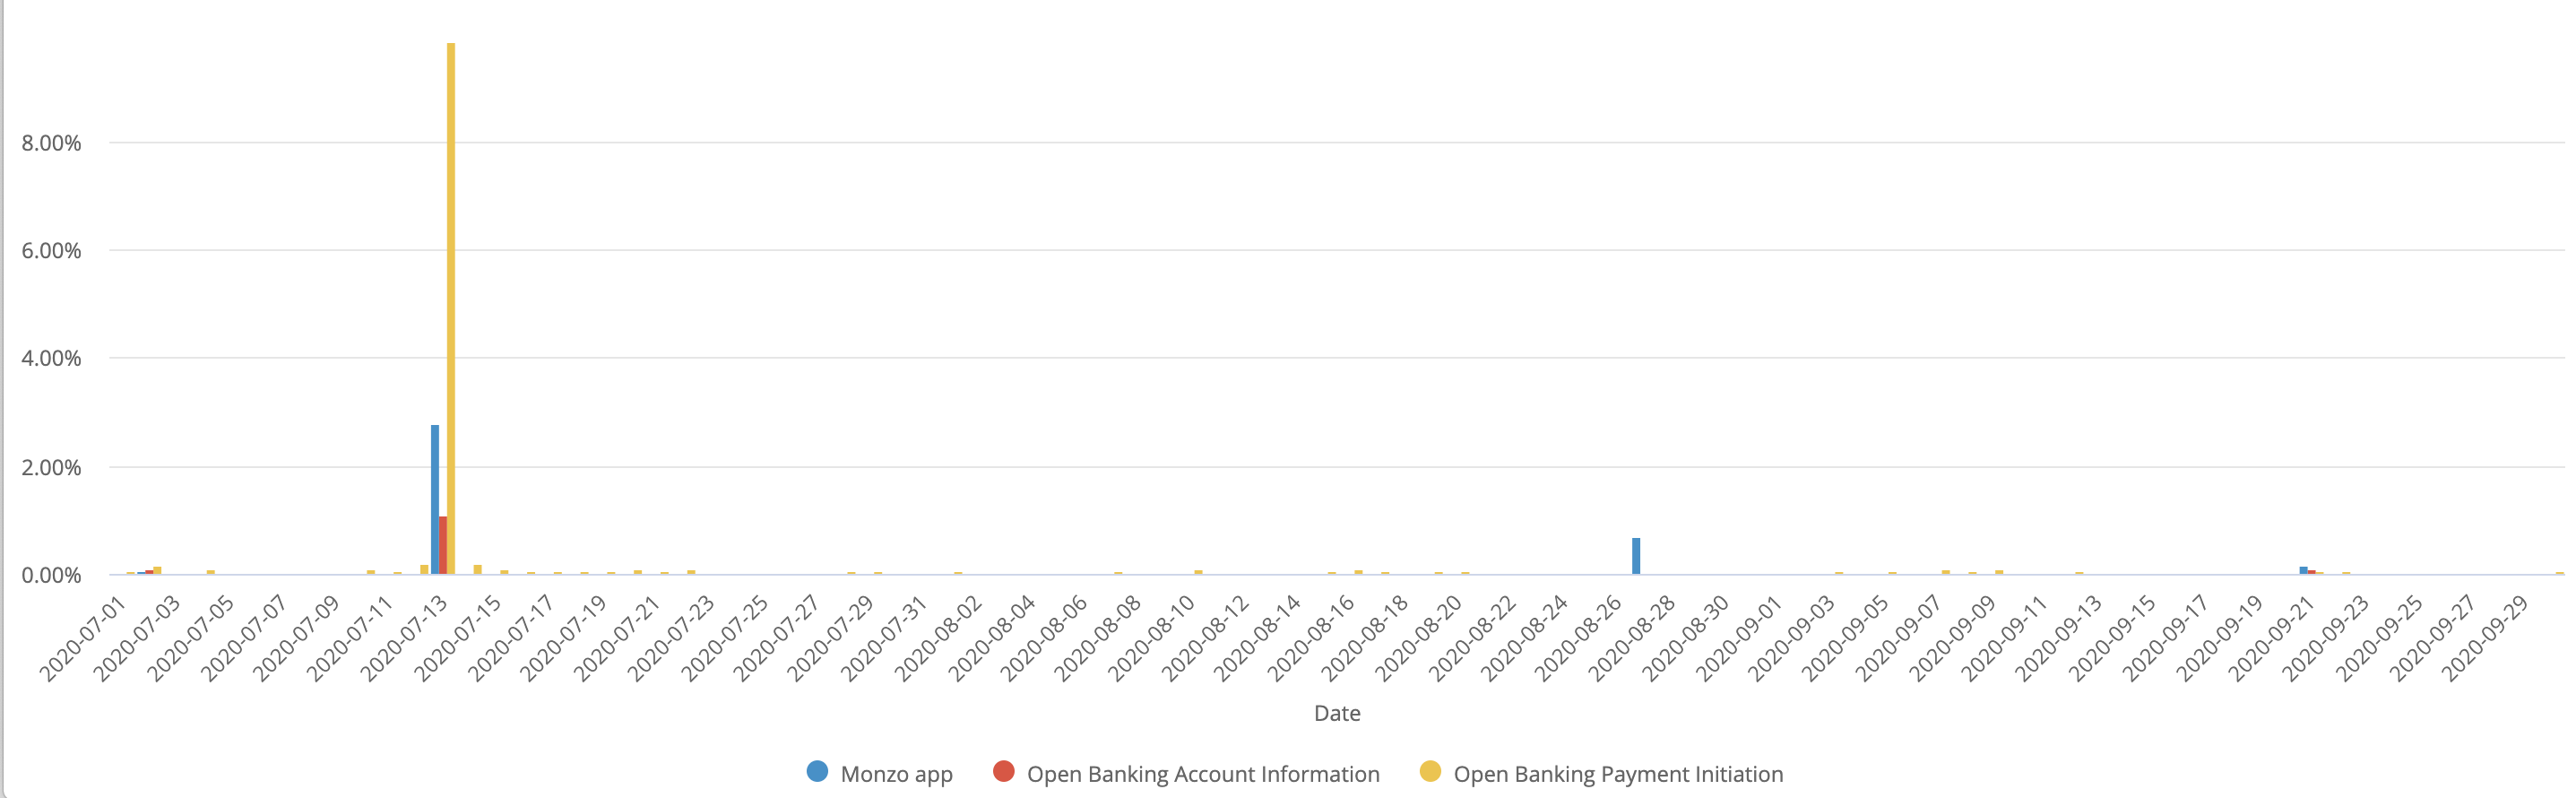 A chart showing the daily error rate of the Monzo App and Open Banking APIs.
                 The data used to generate this chart is included in the table below.